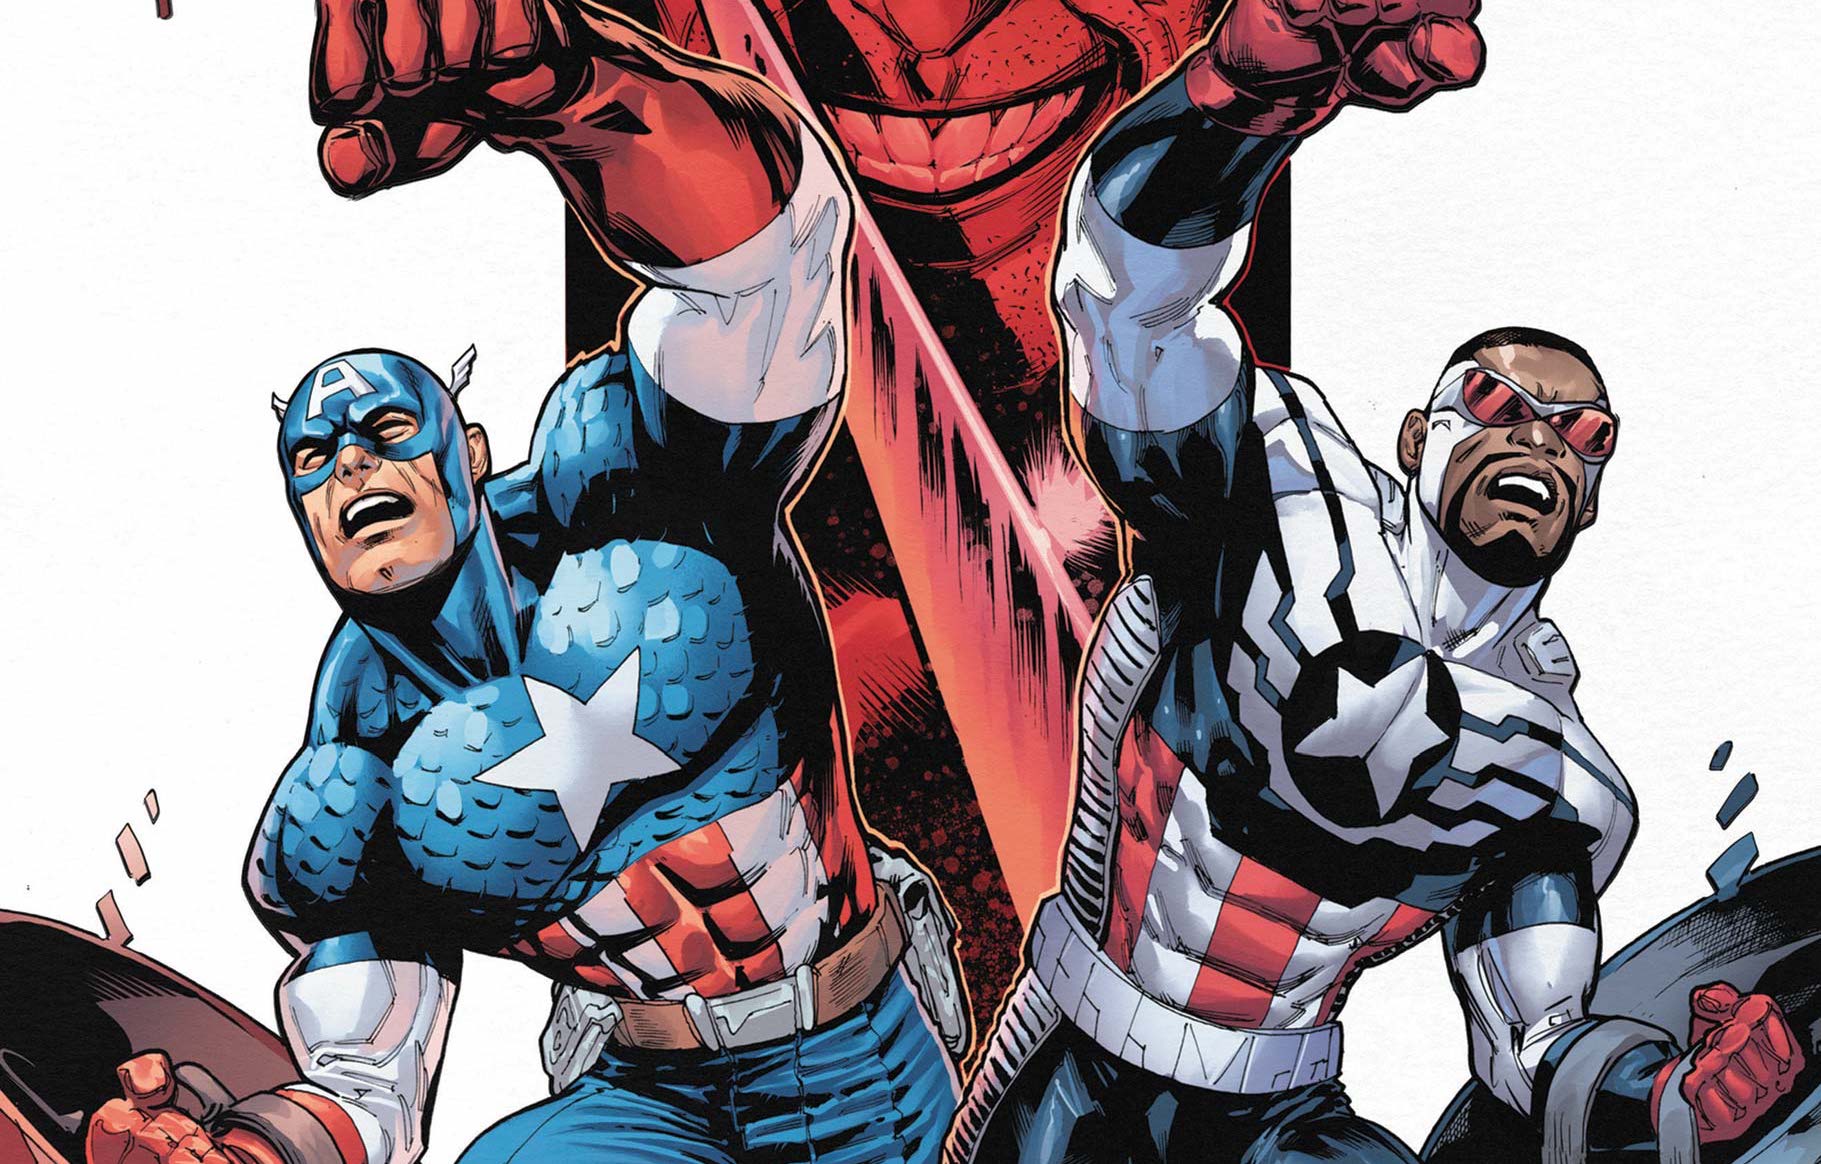 'Captain America: Cold War' #1 is action-packed, cinematic expansion on Cap lore